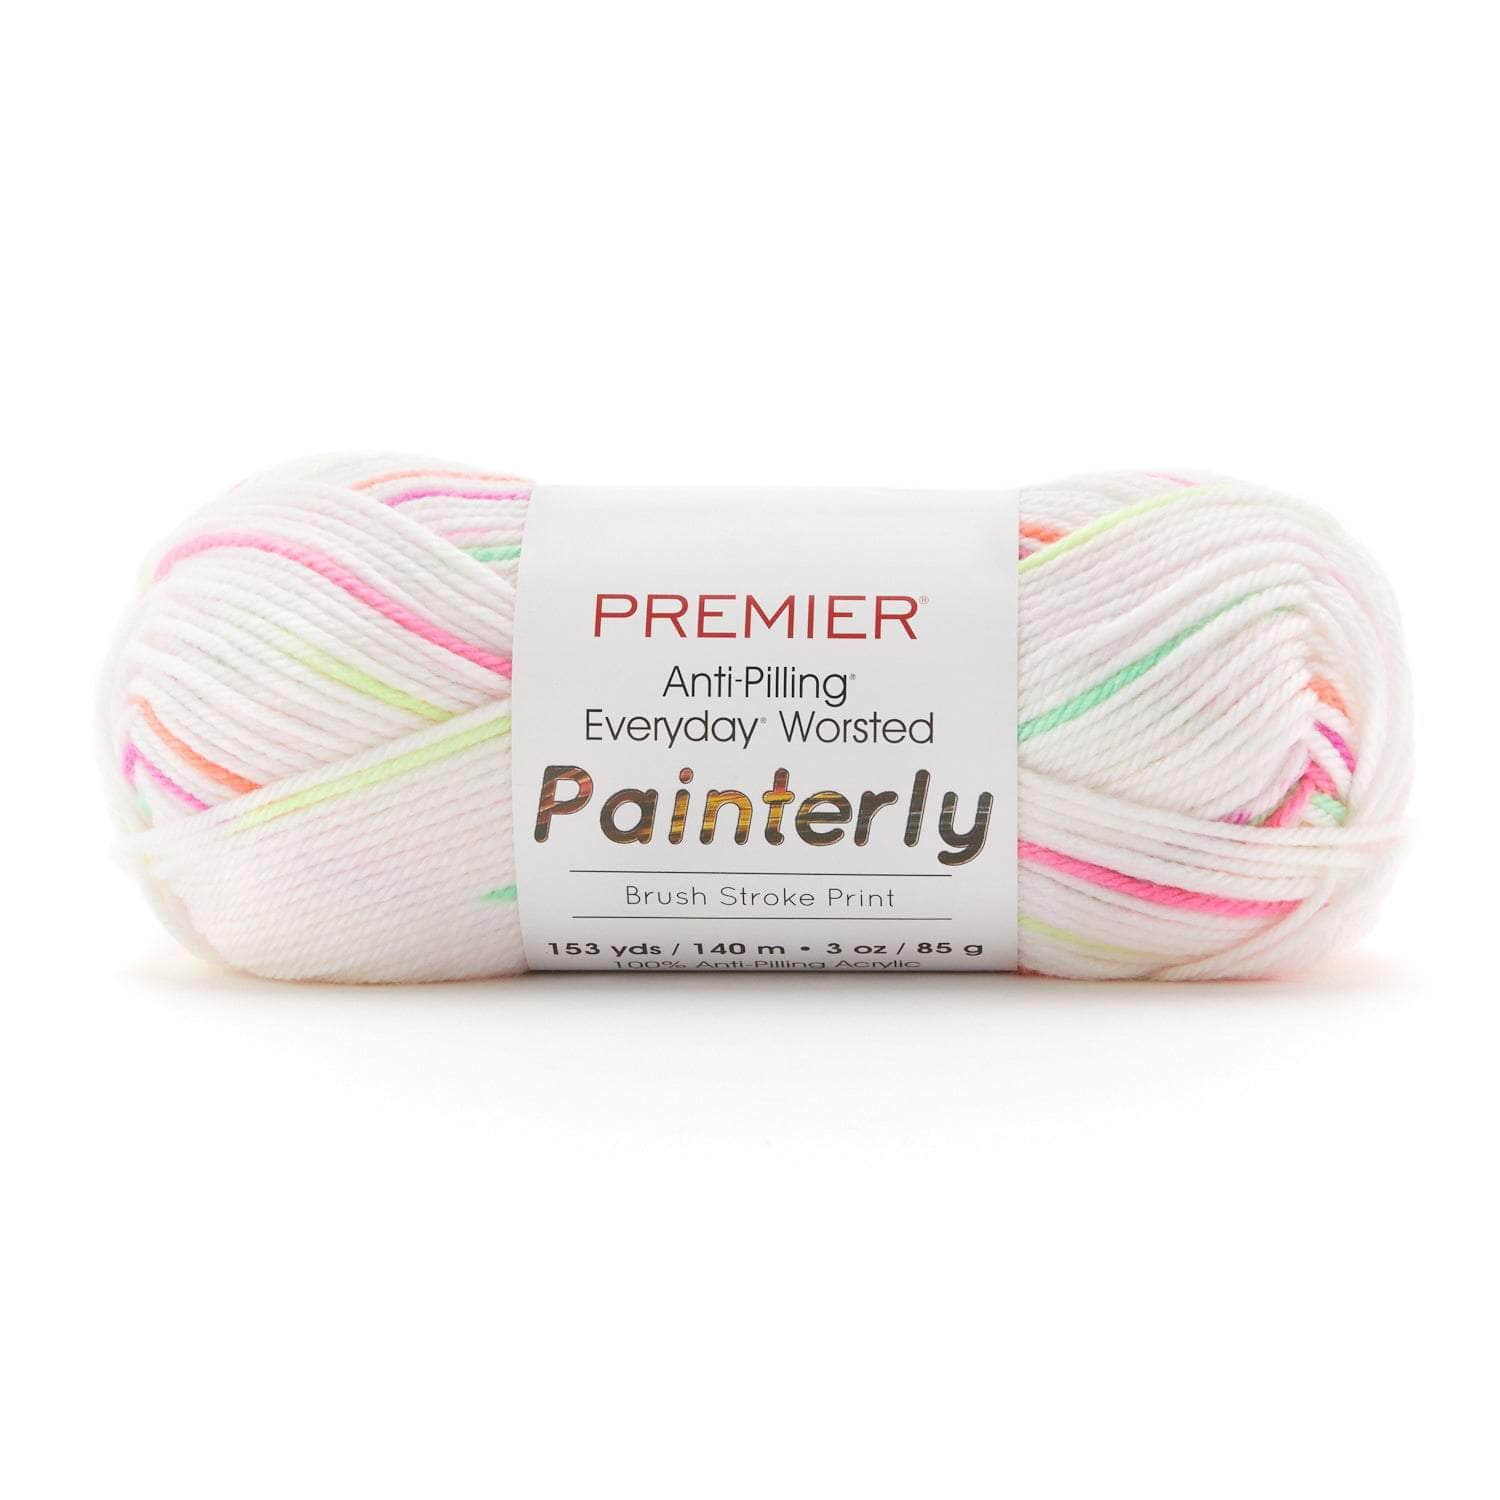 Premier Anti-Pilling Everyday Worsted Yarn-Really Red, 1 count - Gerbes  Super Markets